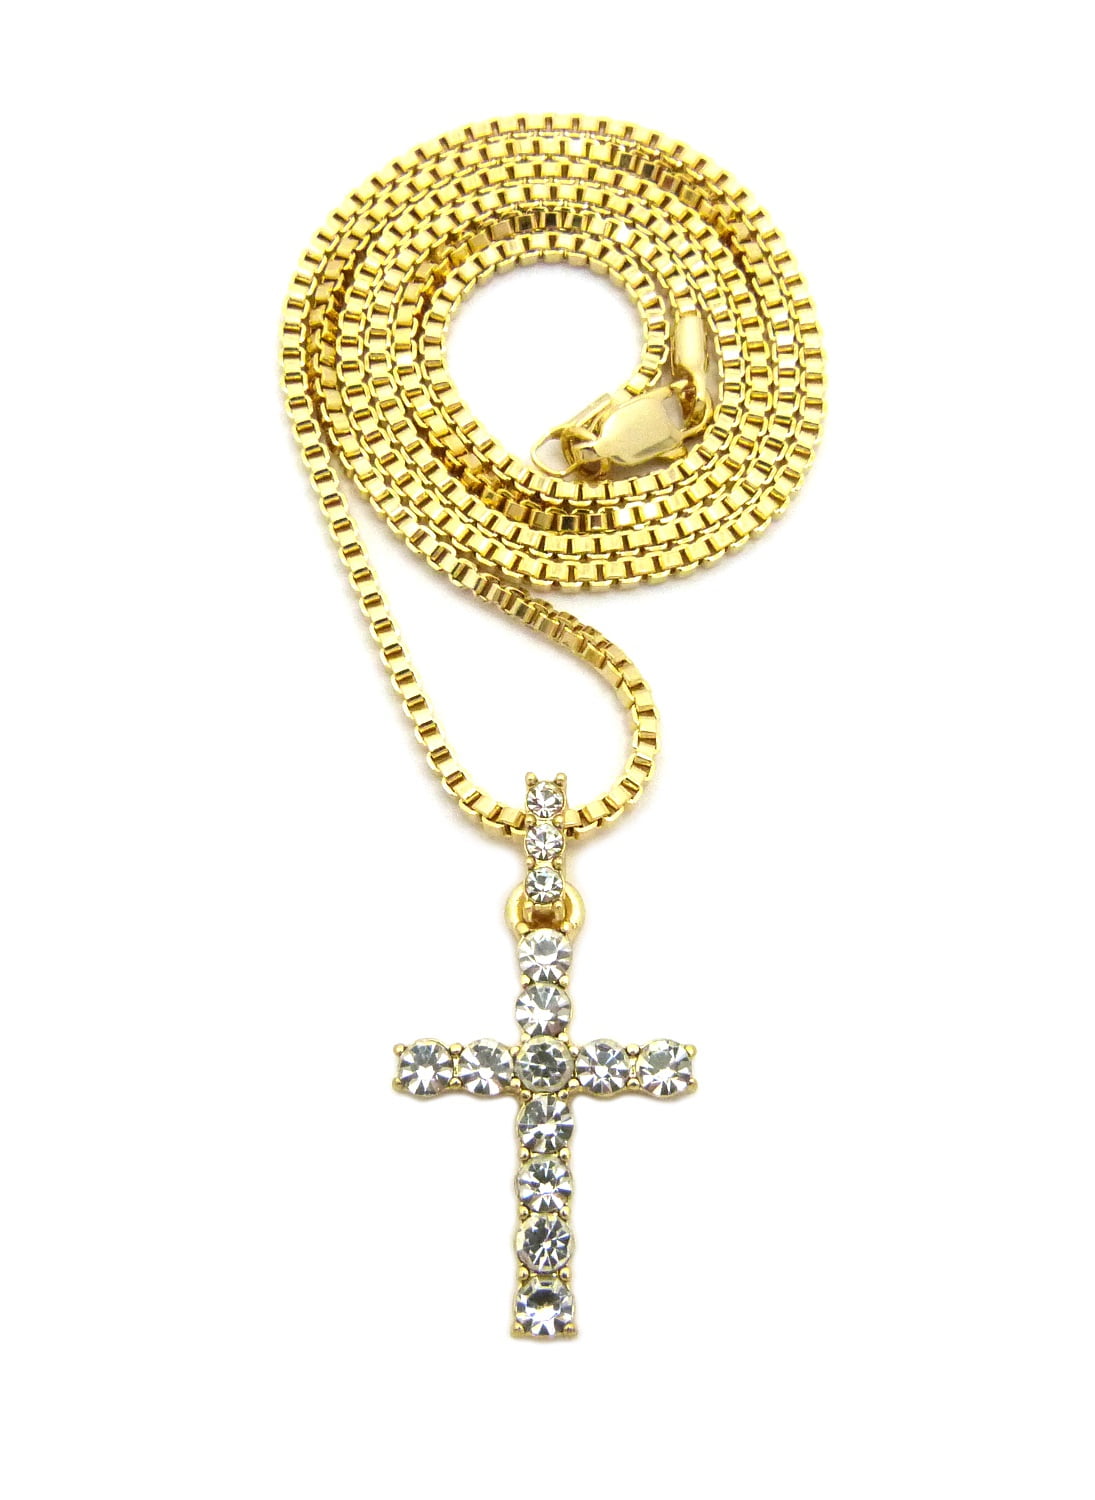 Men Iced Out glo gang Cross Pendant or w/ 4mm 36" Franco Chain Necklace FS005 